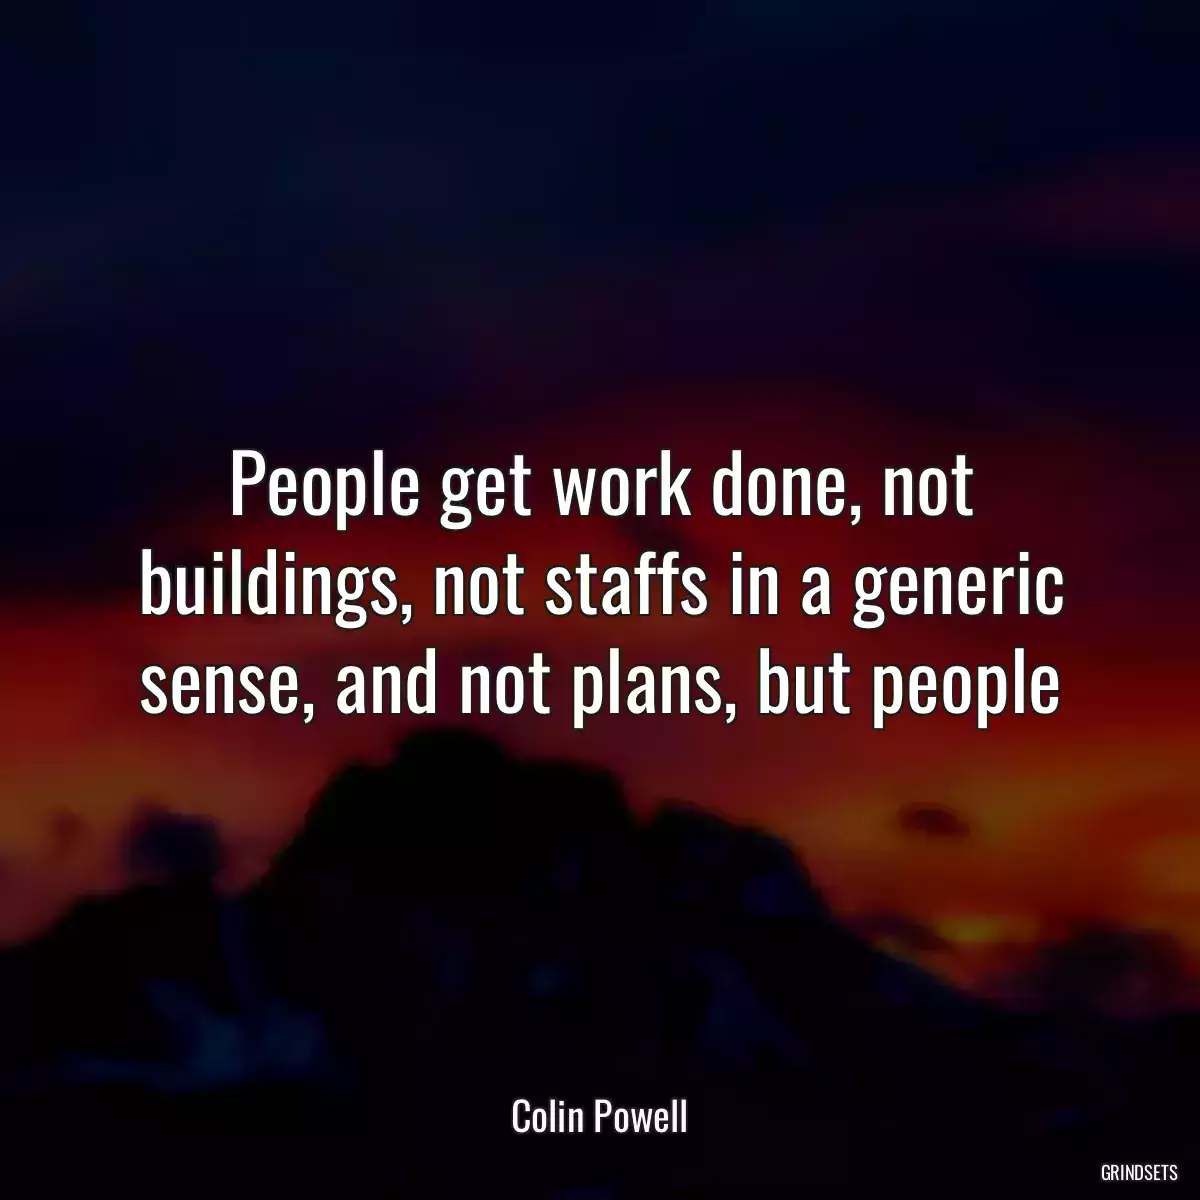 People get work done, not buildings, not staffs in a generic sense, and not plans, but people